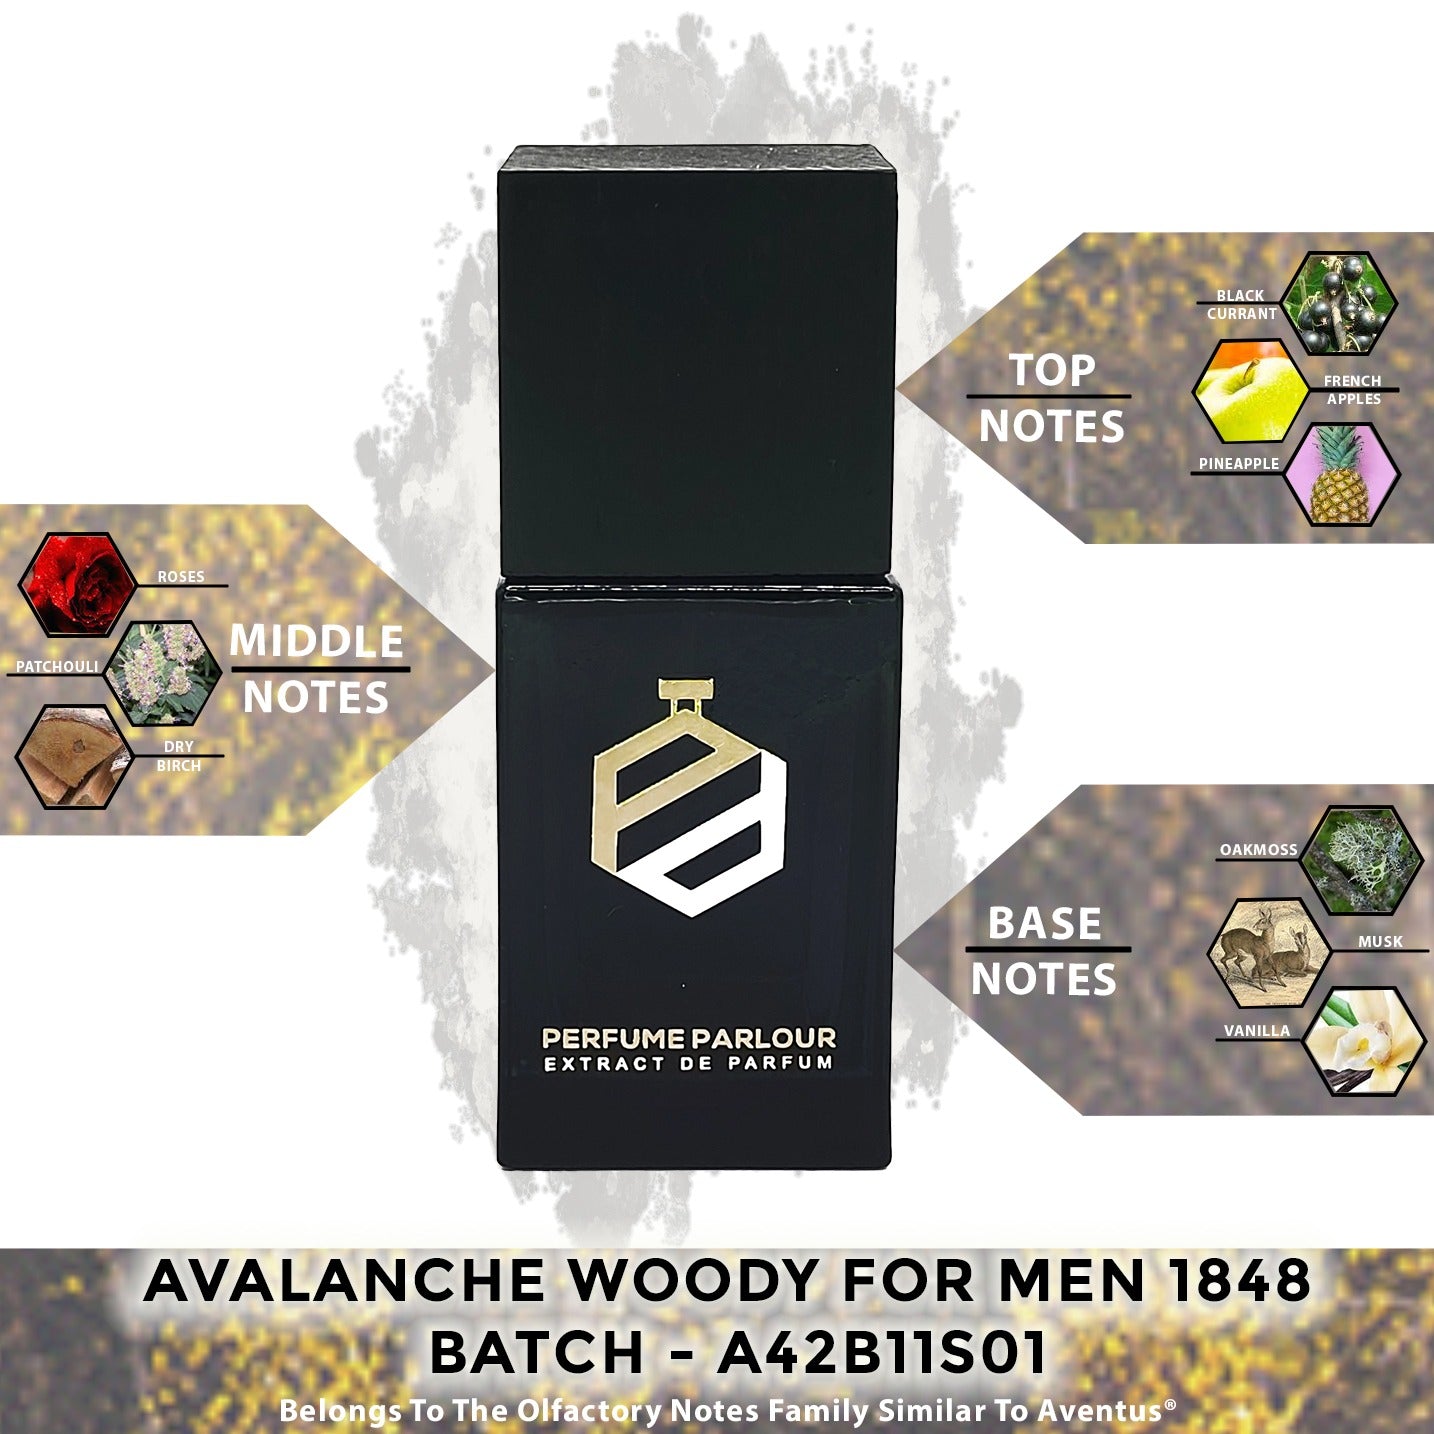 Avalanche Woody For Men 1848 - Batch - A42B11S01 - Perfume Parlour